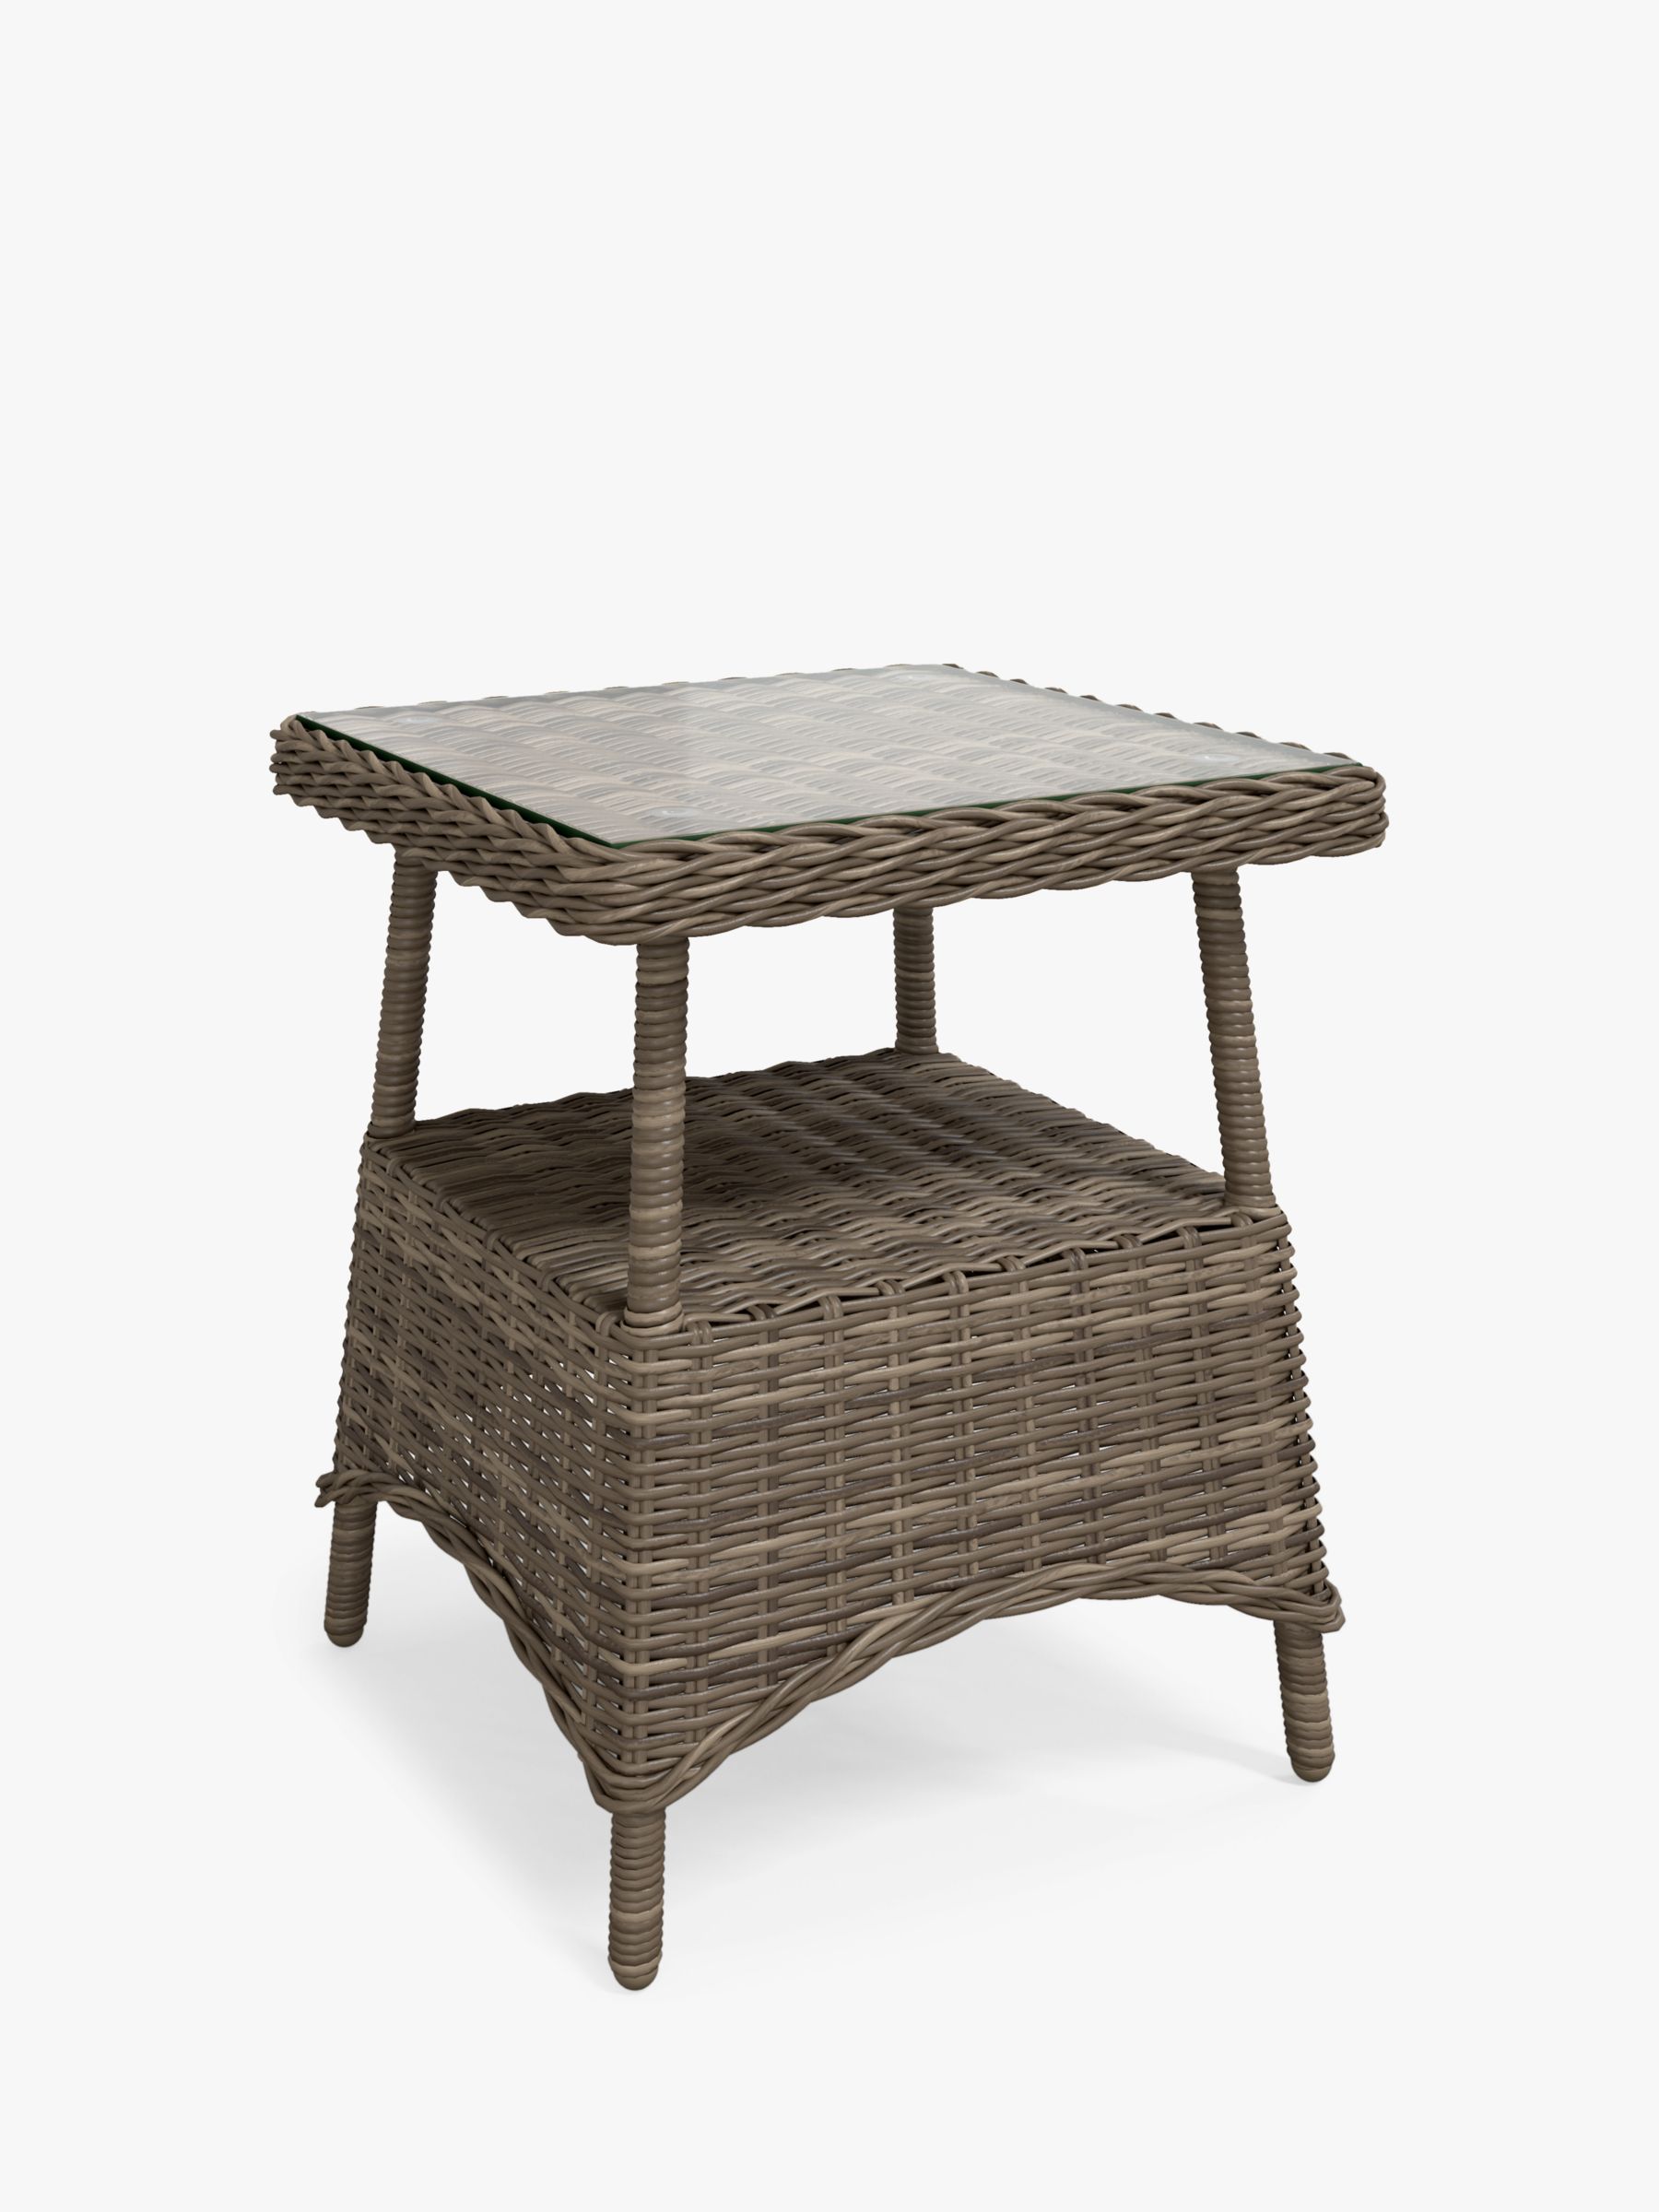 John Lewis Rye Woven Square Garden Side Table, Natural